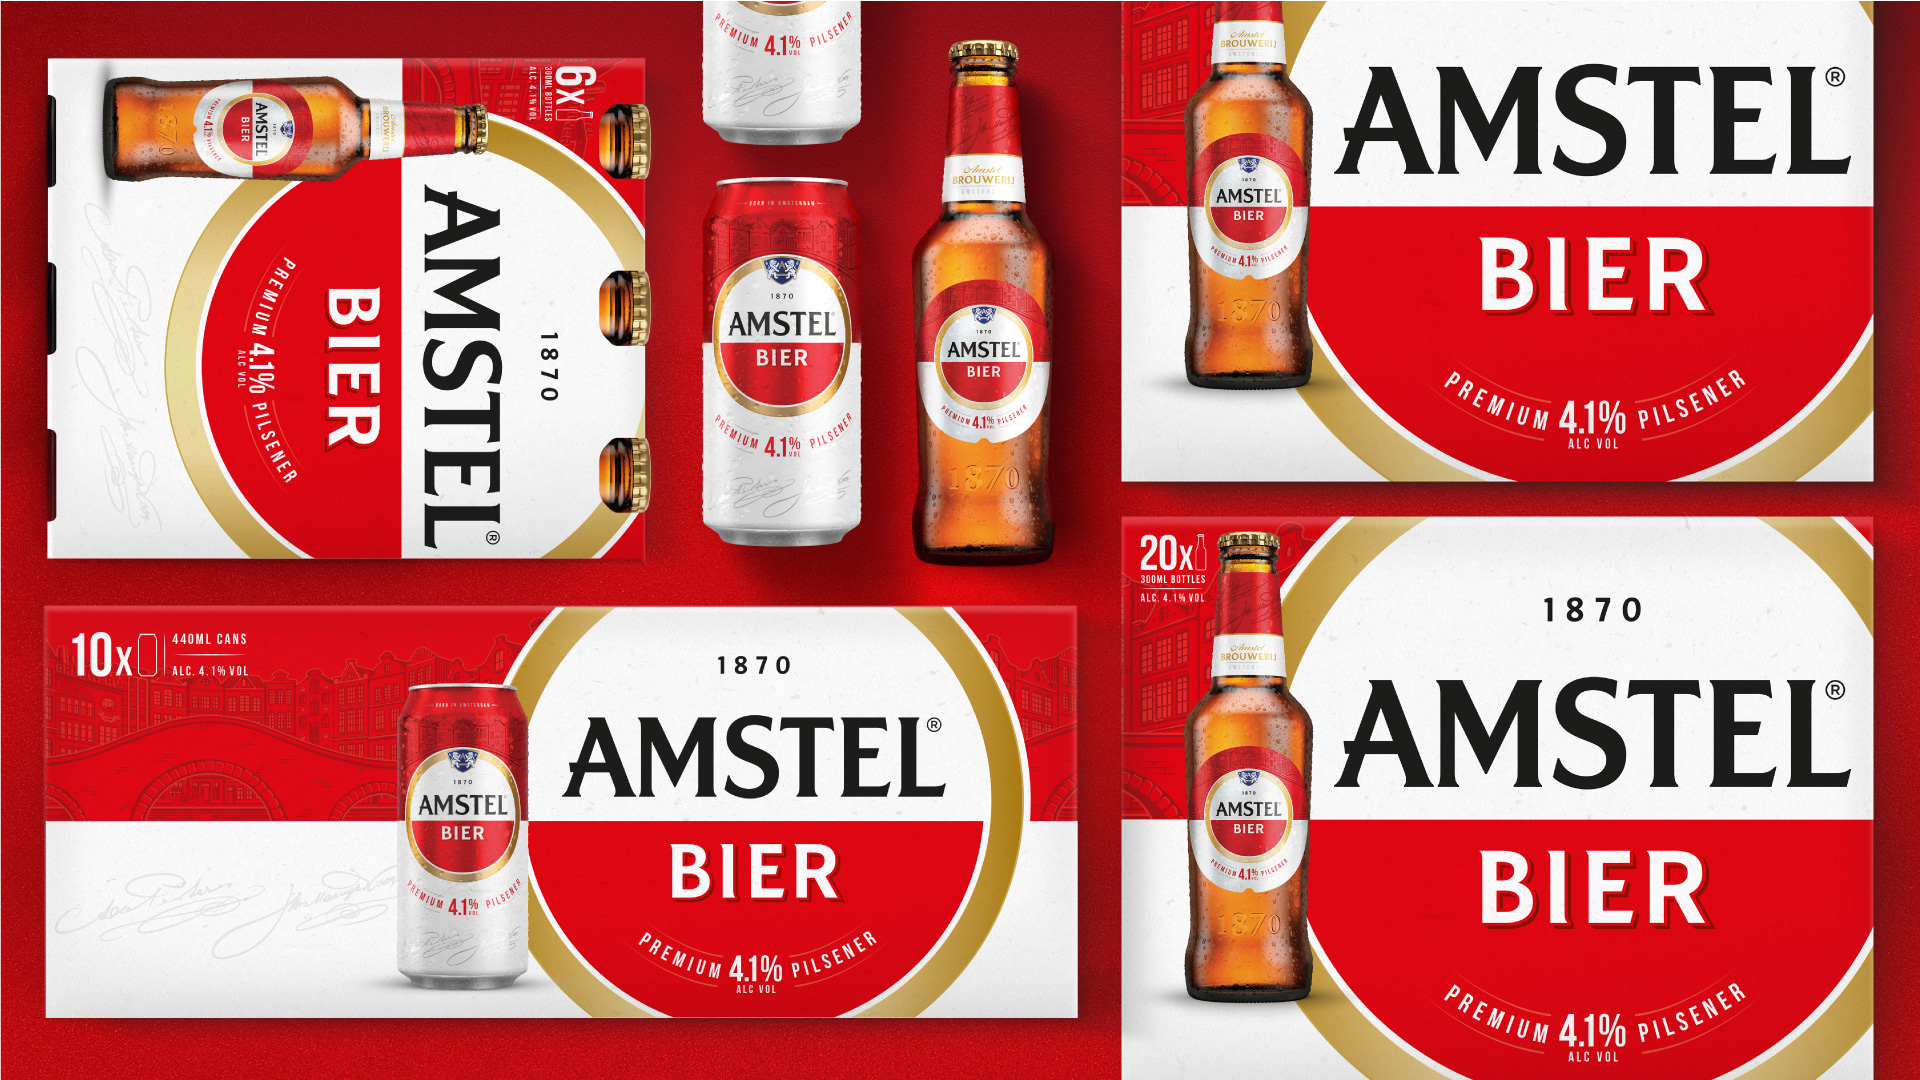 New Logo and Packaging for Amstel by Elmwood